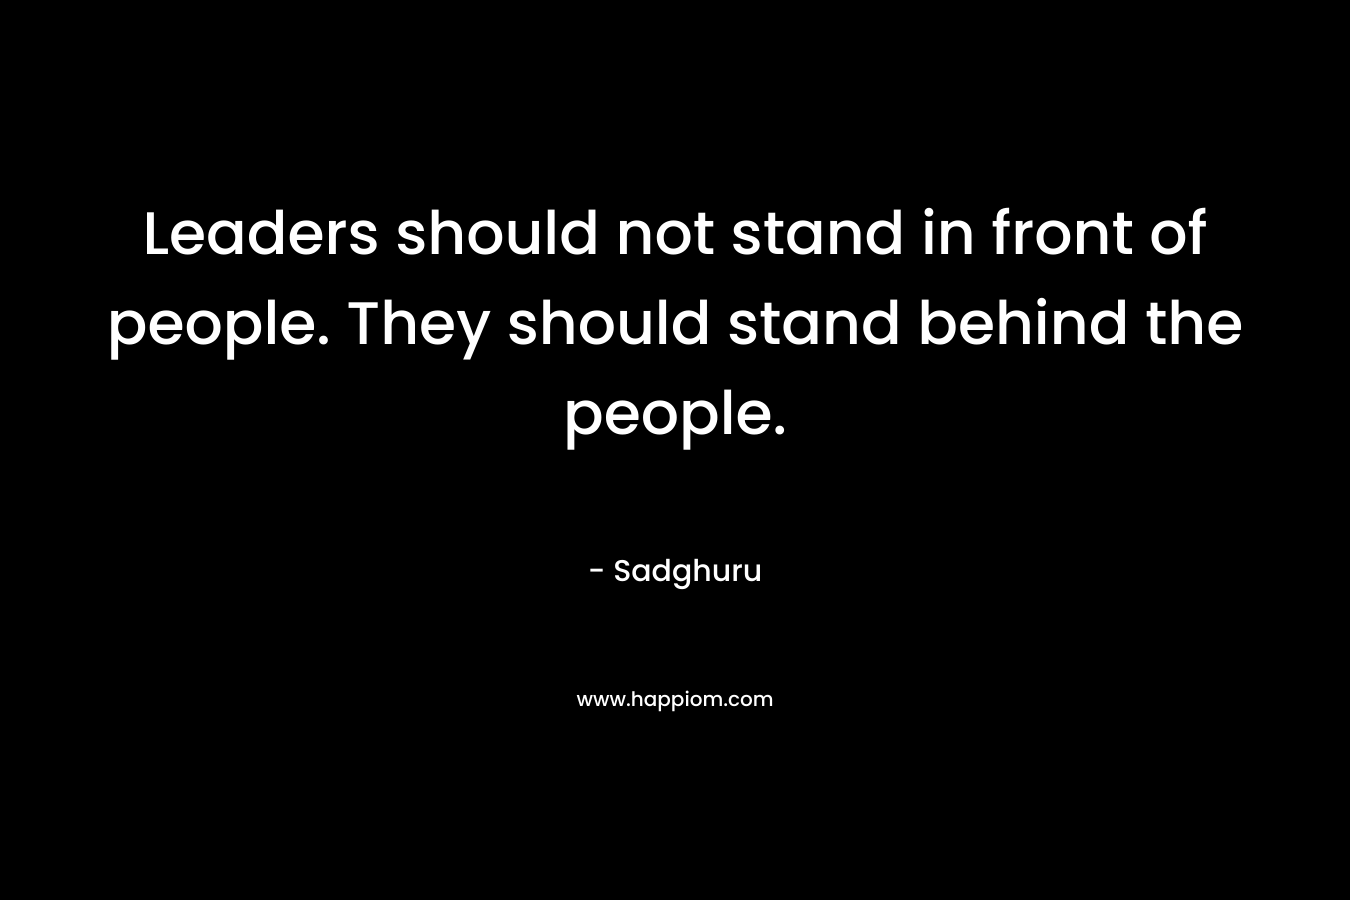 Leaders should not stand in front of people. They should stand behind the people.